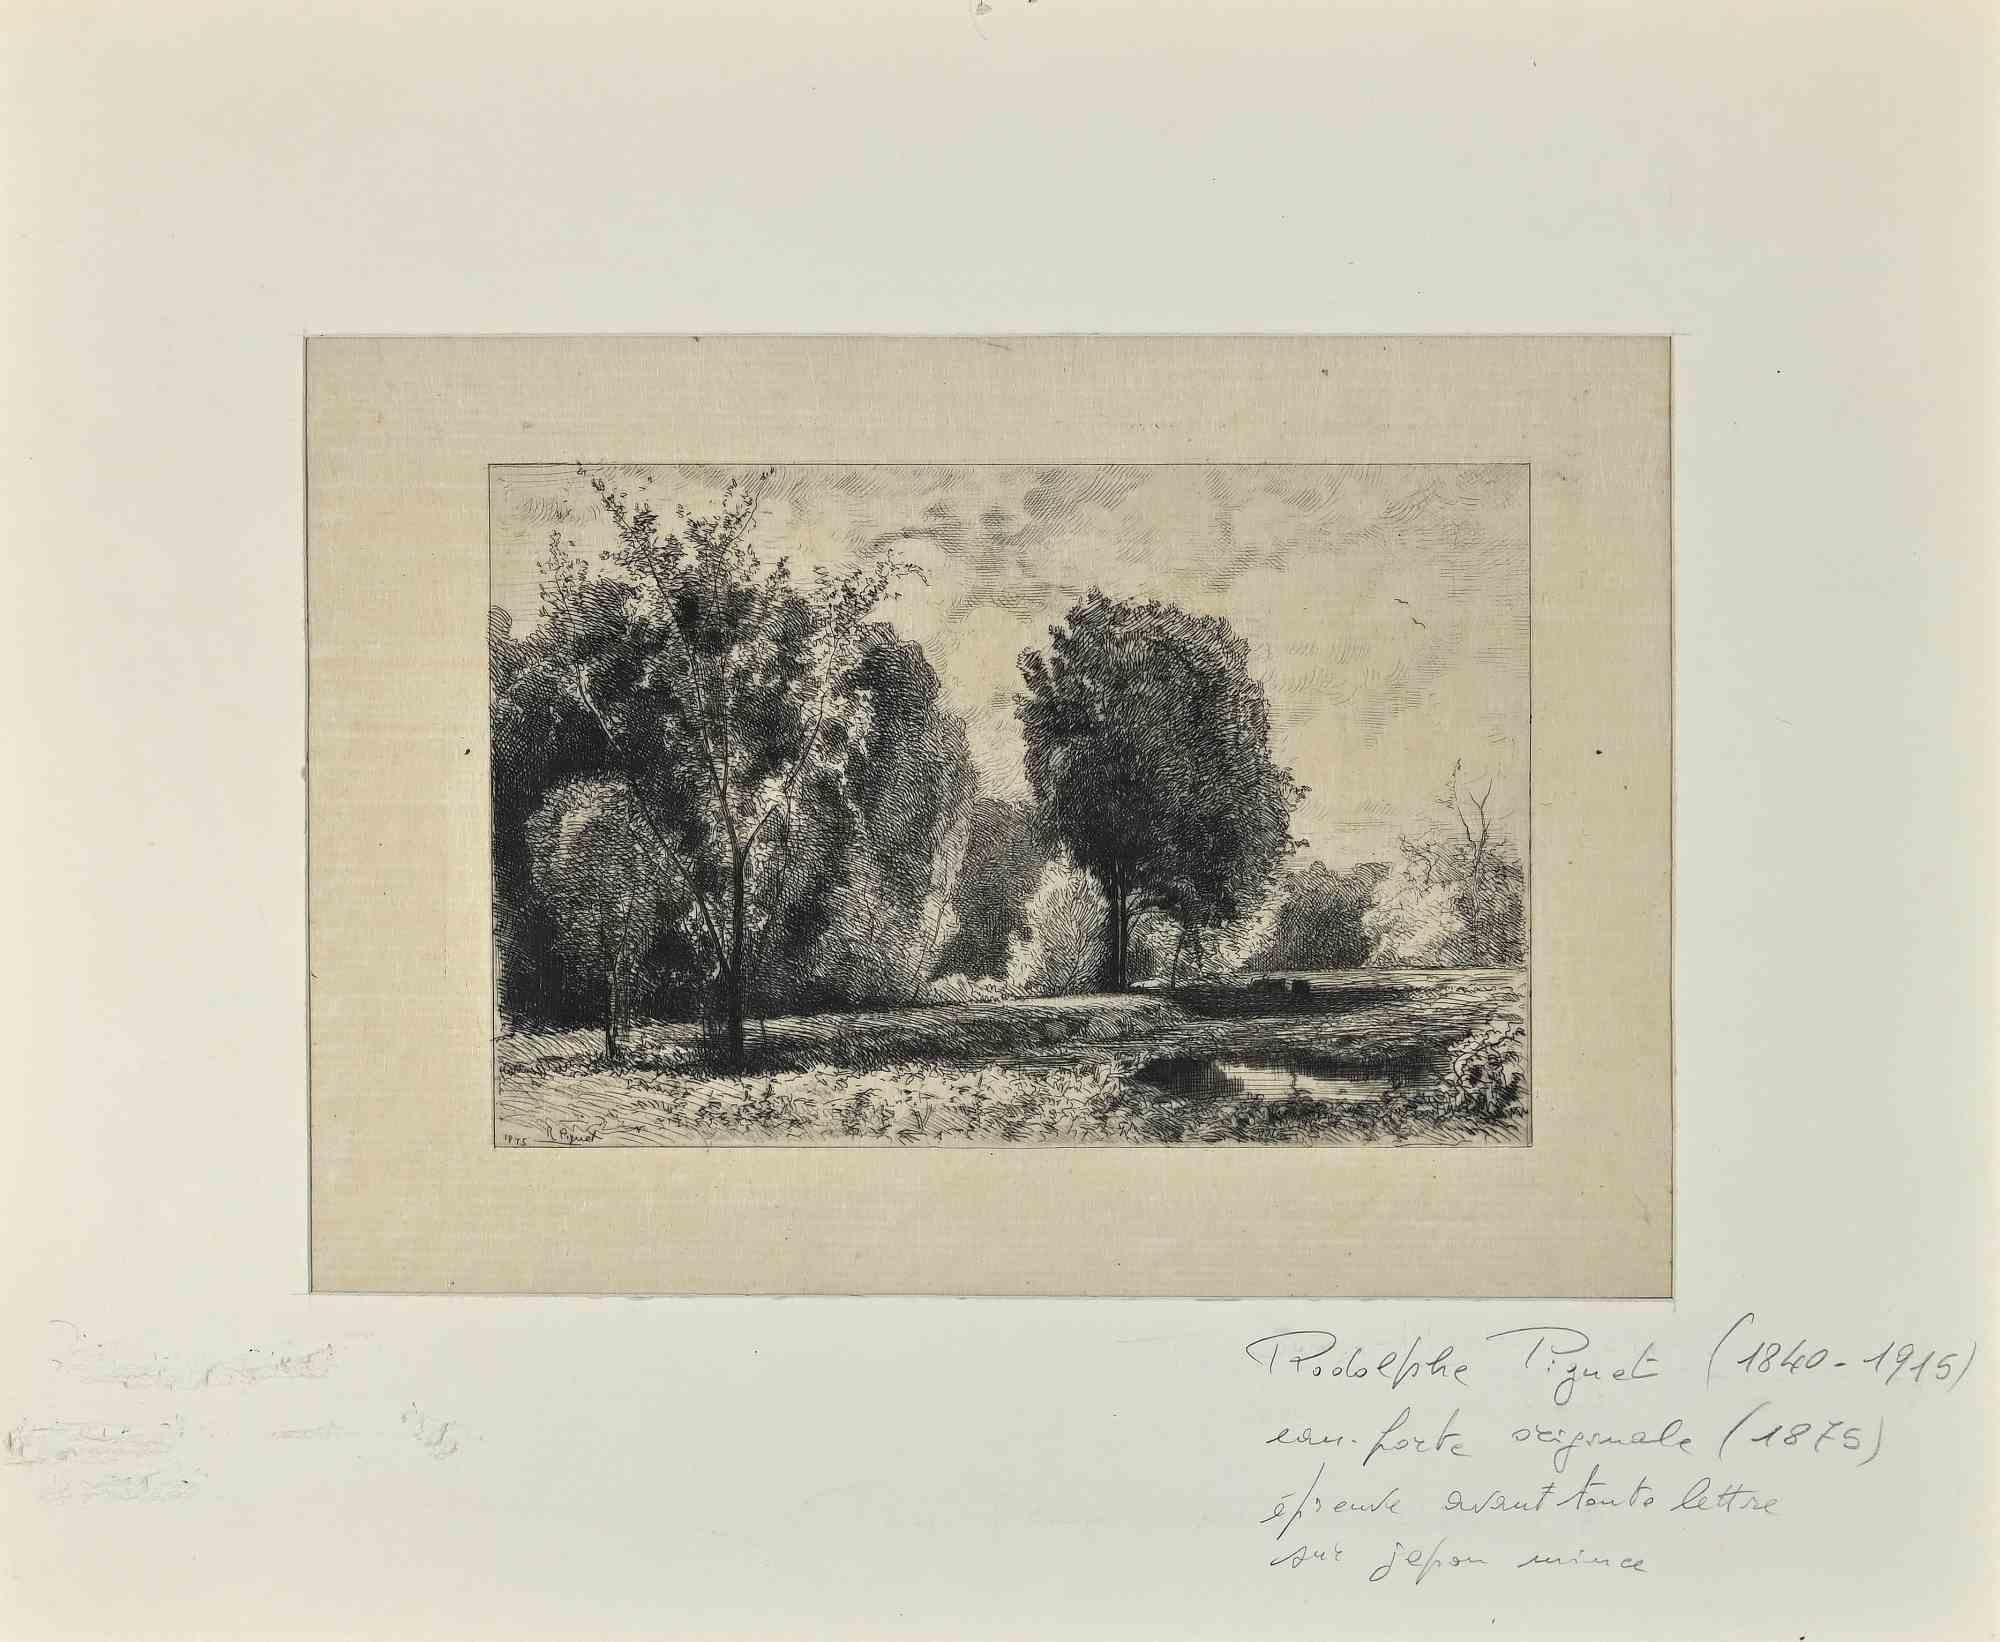 Landscape is an original artwork realized by Rodolphe Piguet (1840-1915) in 1875.

Original etching.

The work is contained in a white passepartout.

Hand-signed and dated by the artist in the lower right corner of the artwork.

Good condition.